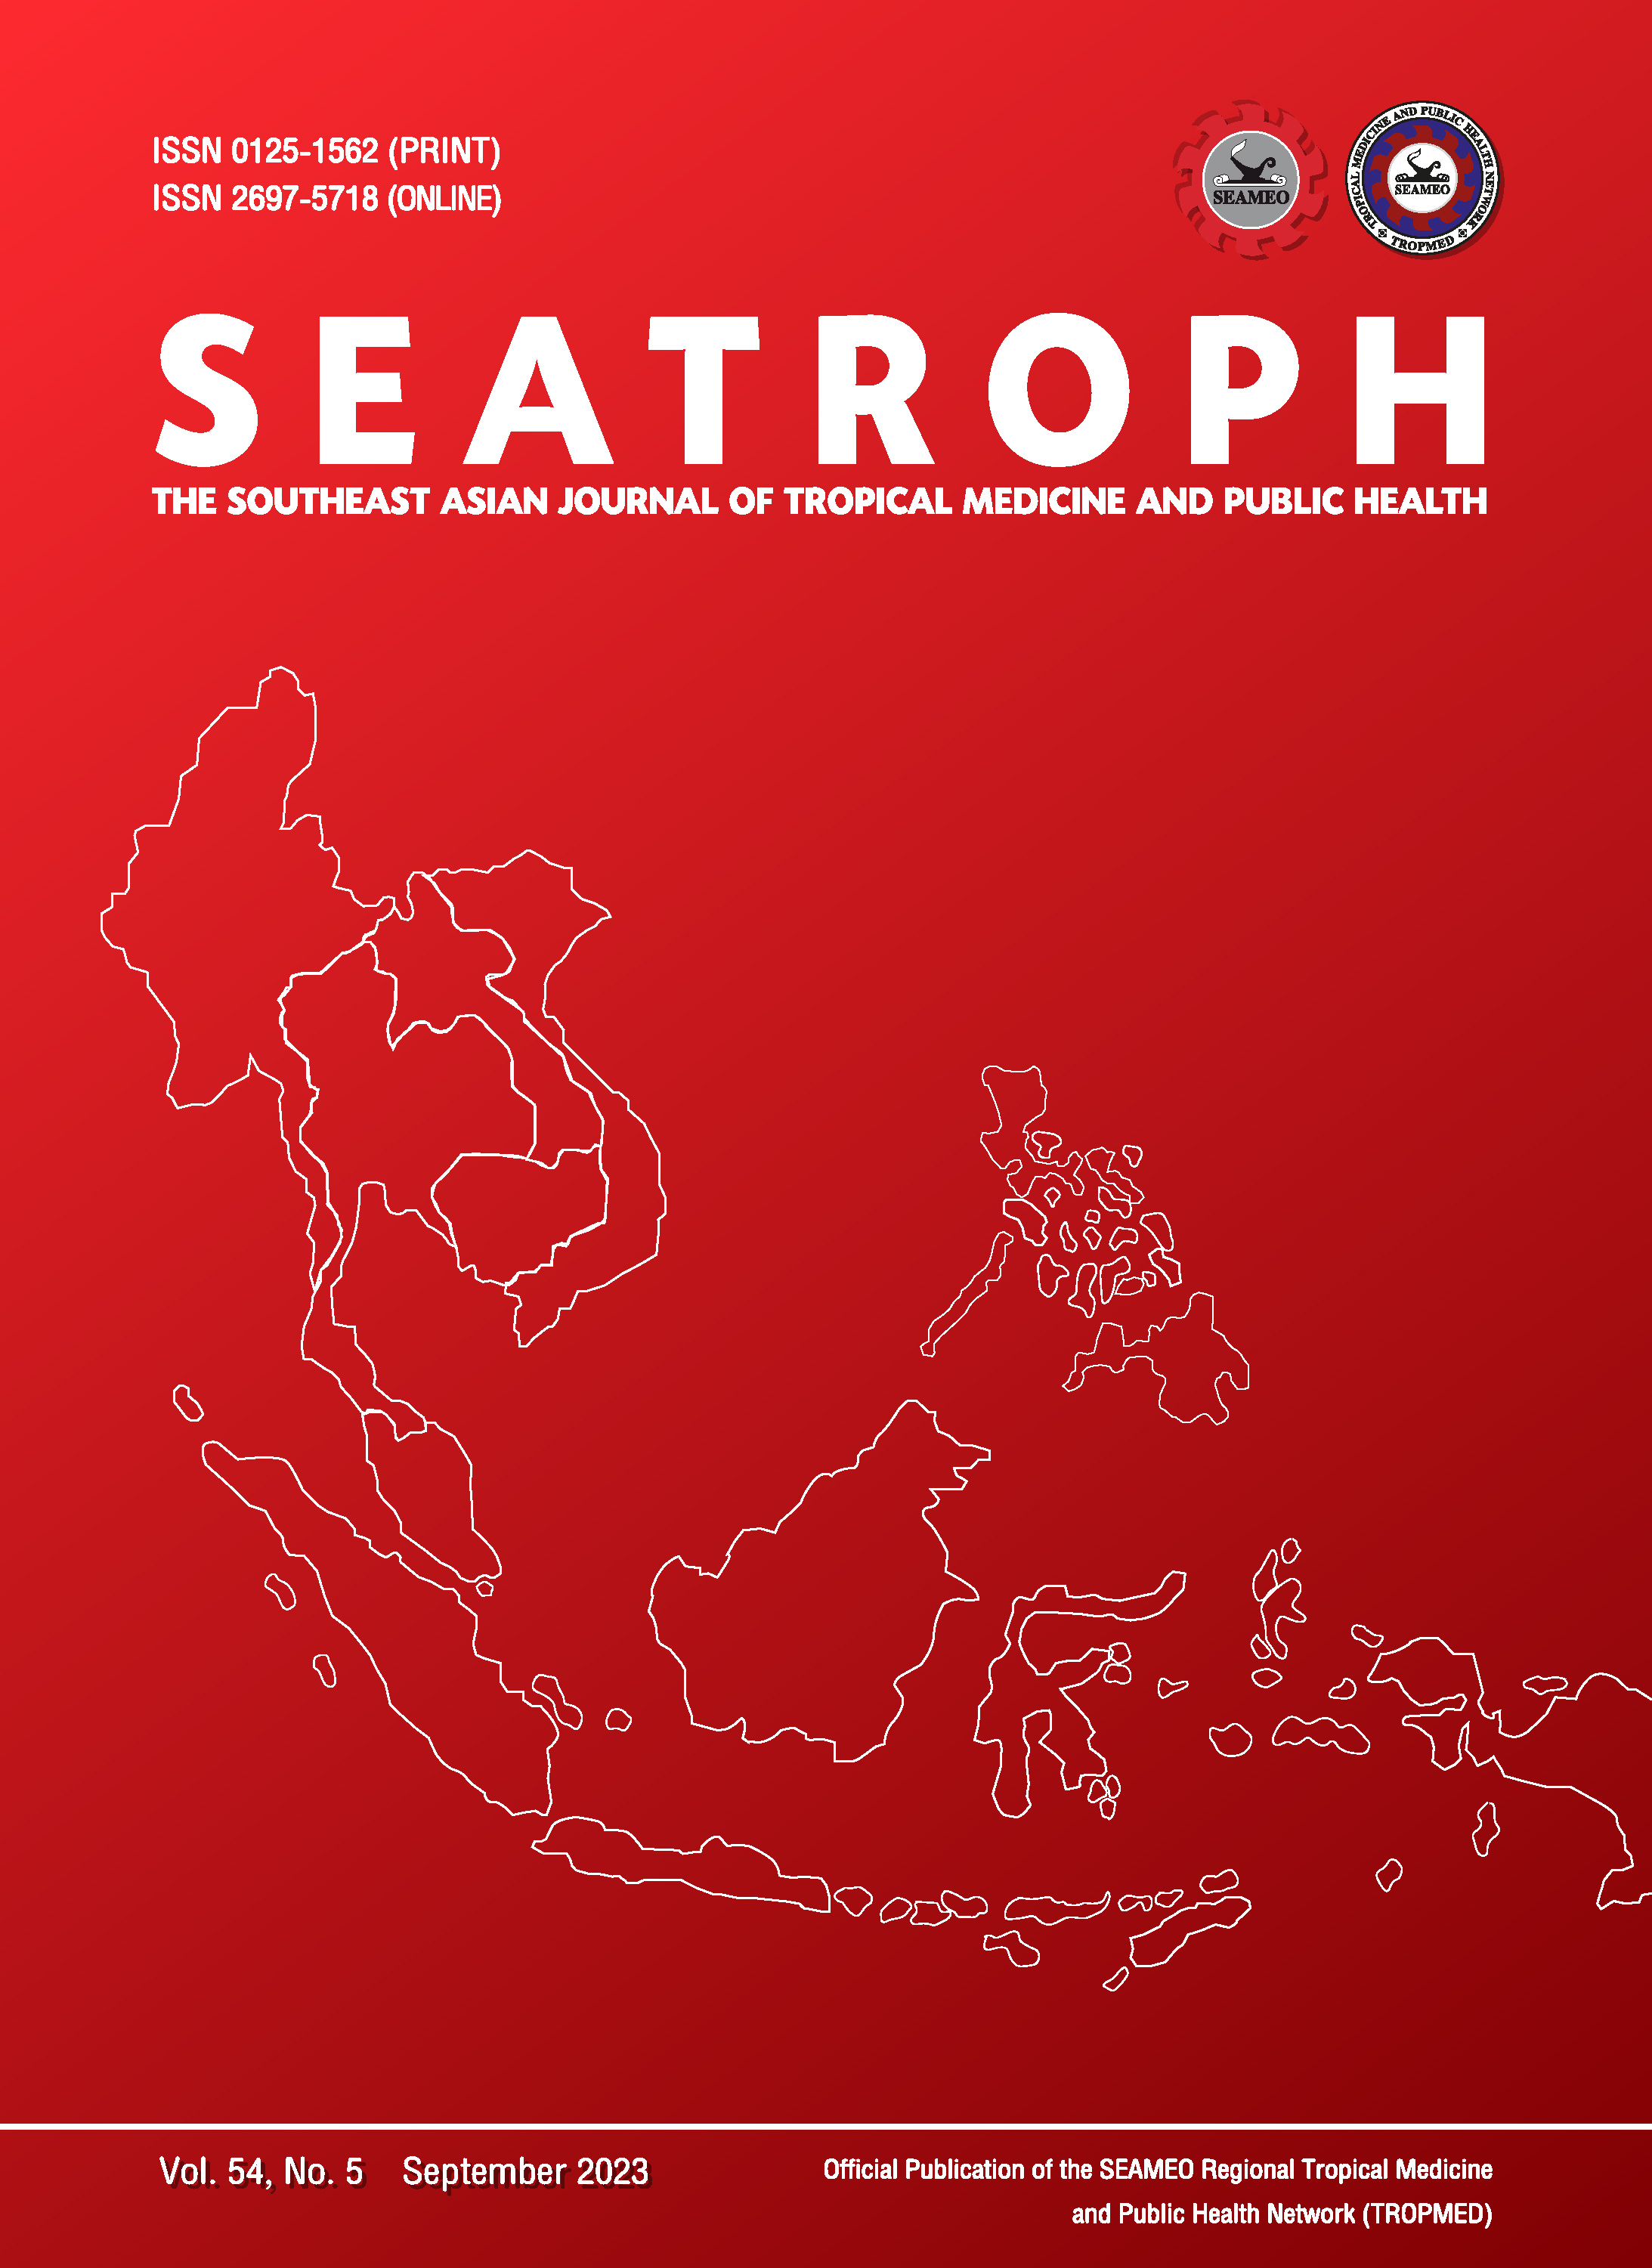 					View Vol. 54 No. 5 (2023): THE SOUTHEAST ASIAN JOURNAL OF TROPICAL MEDICINE AND PUBLIC HEALTH
				